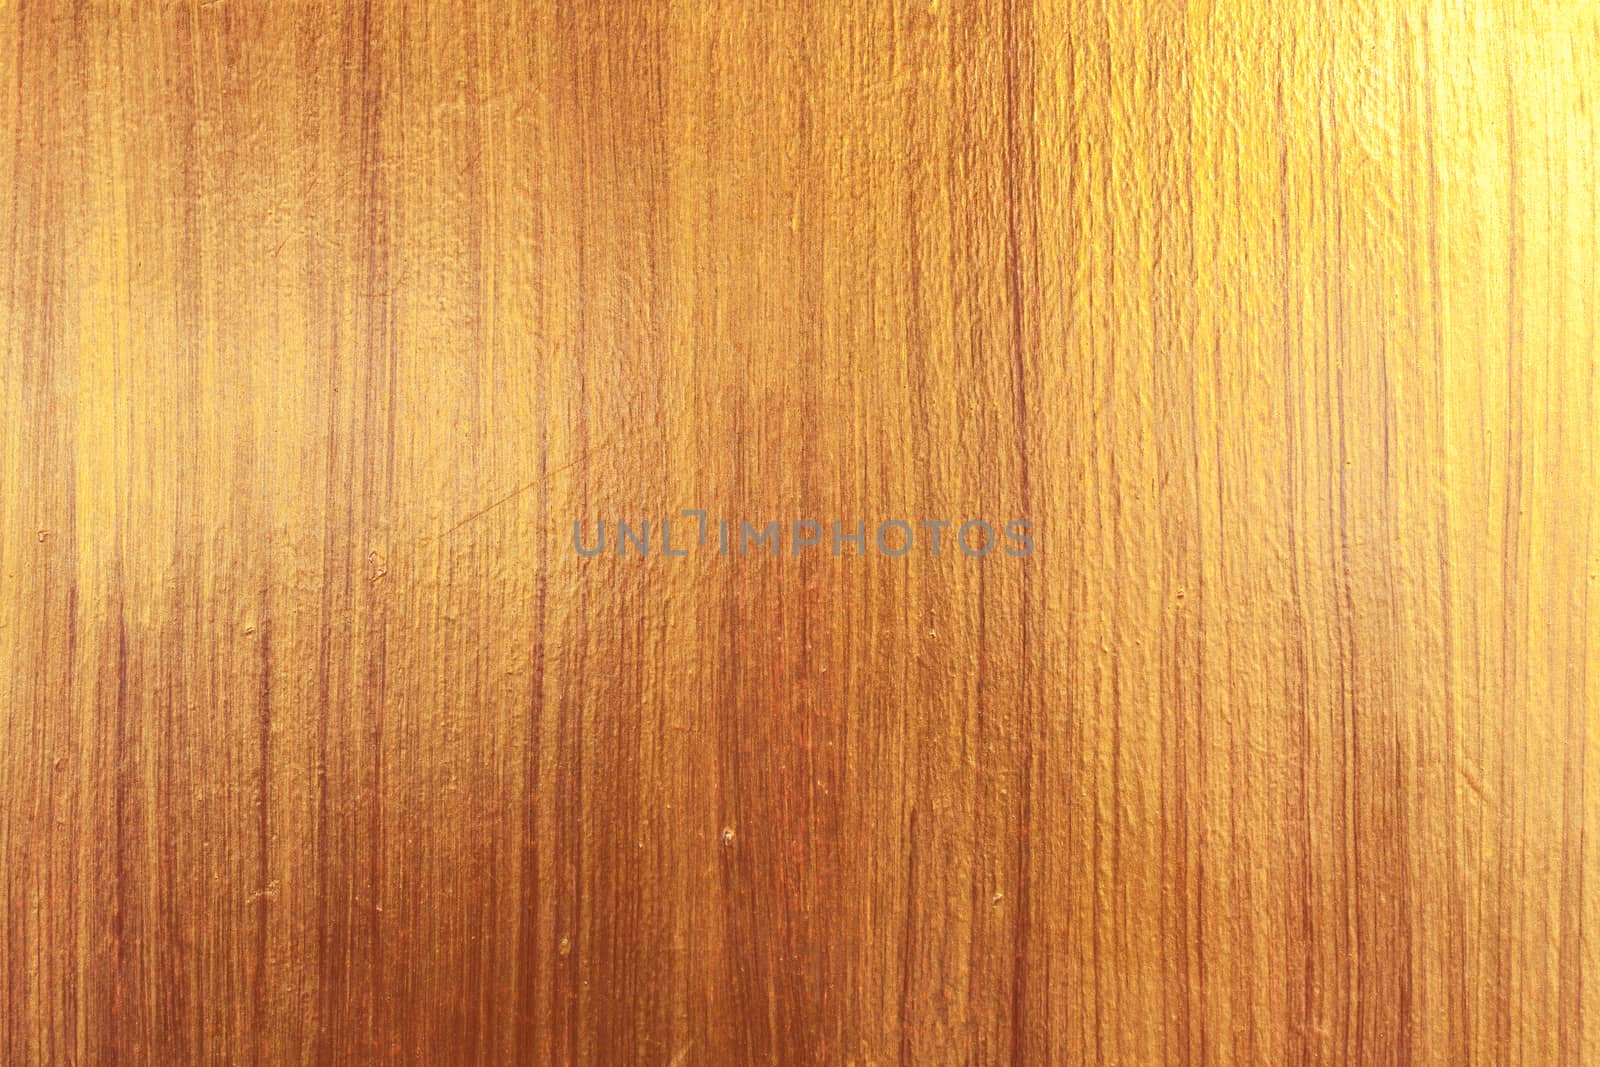 high resolution gold and bown wood texture background by nopparats